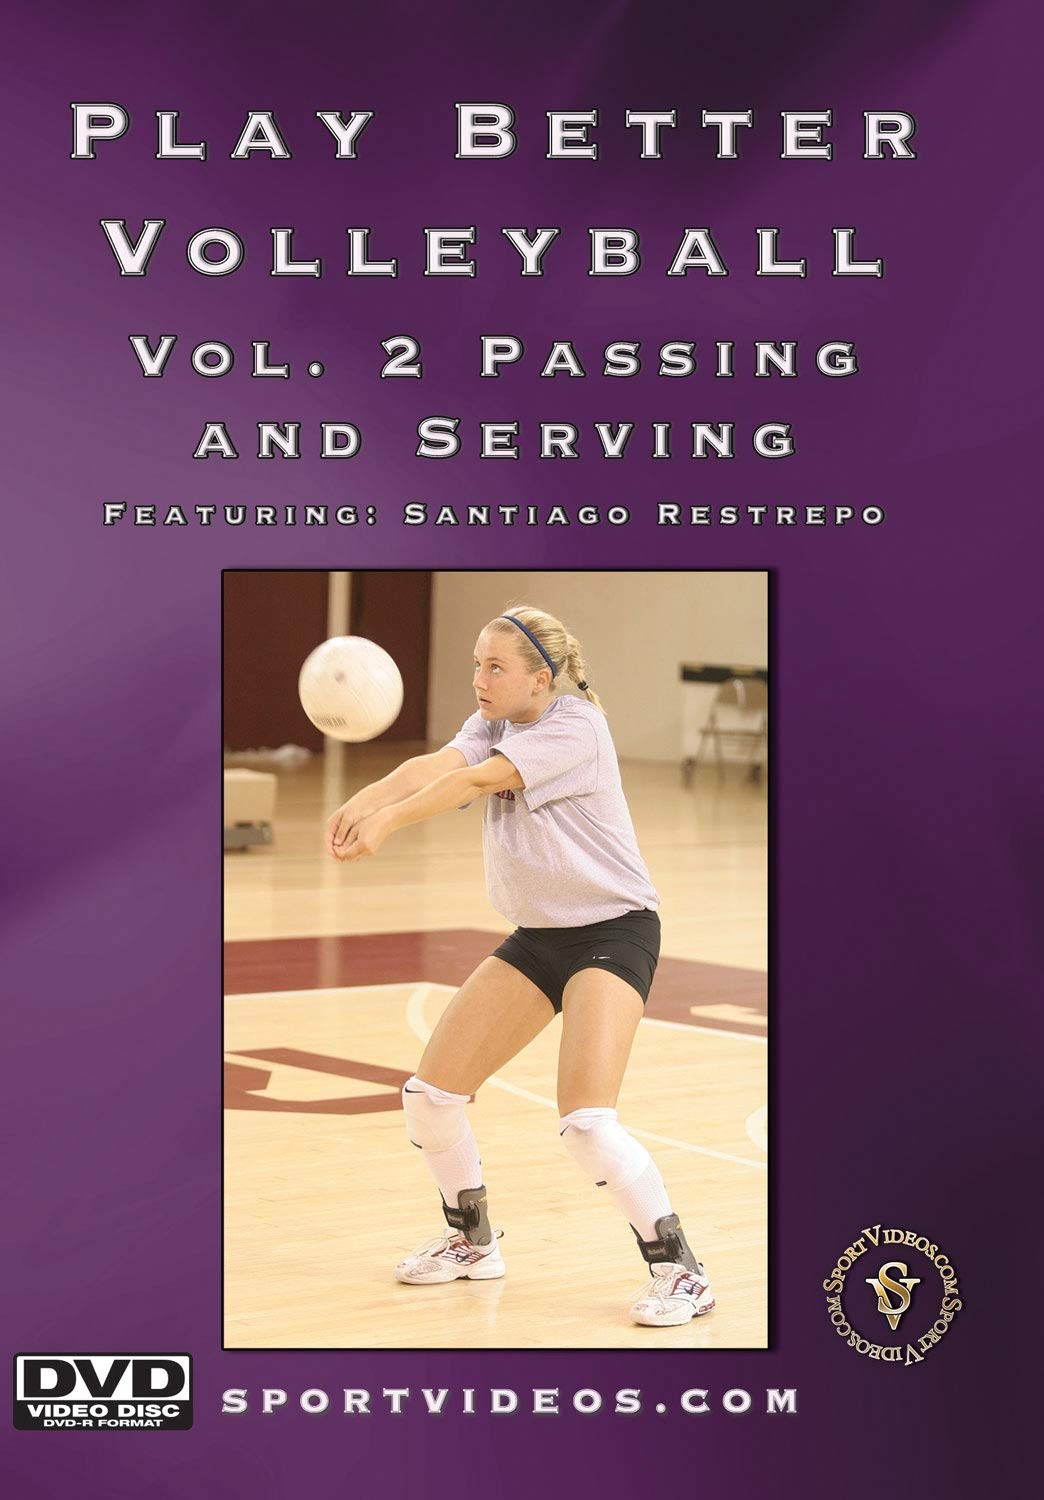 Play Better Volleyball Vol 2 Passing and Serving